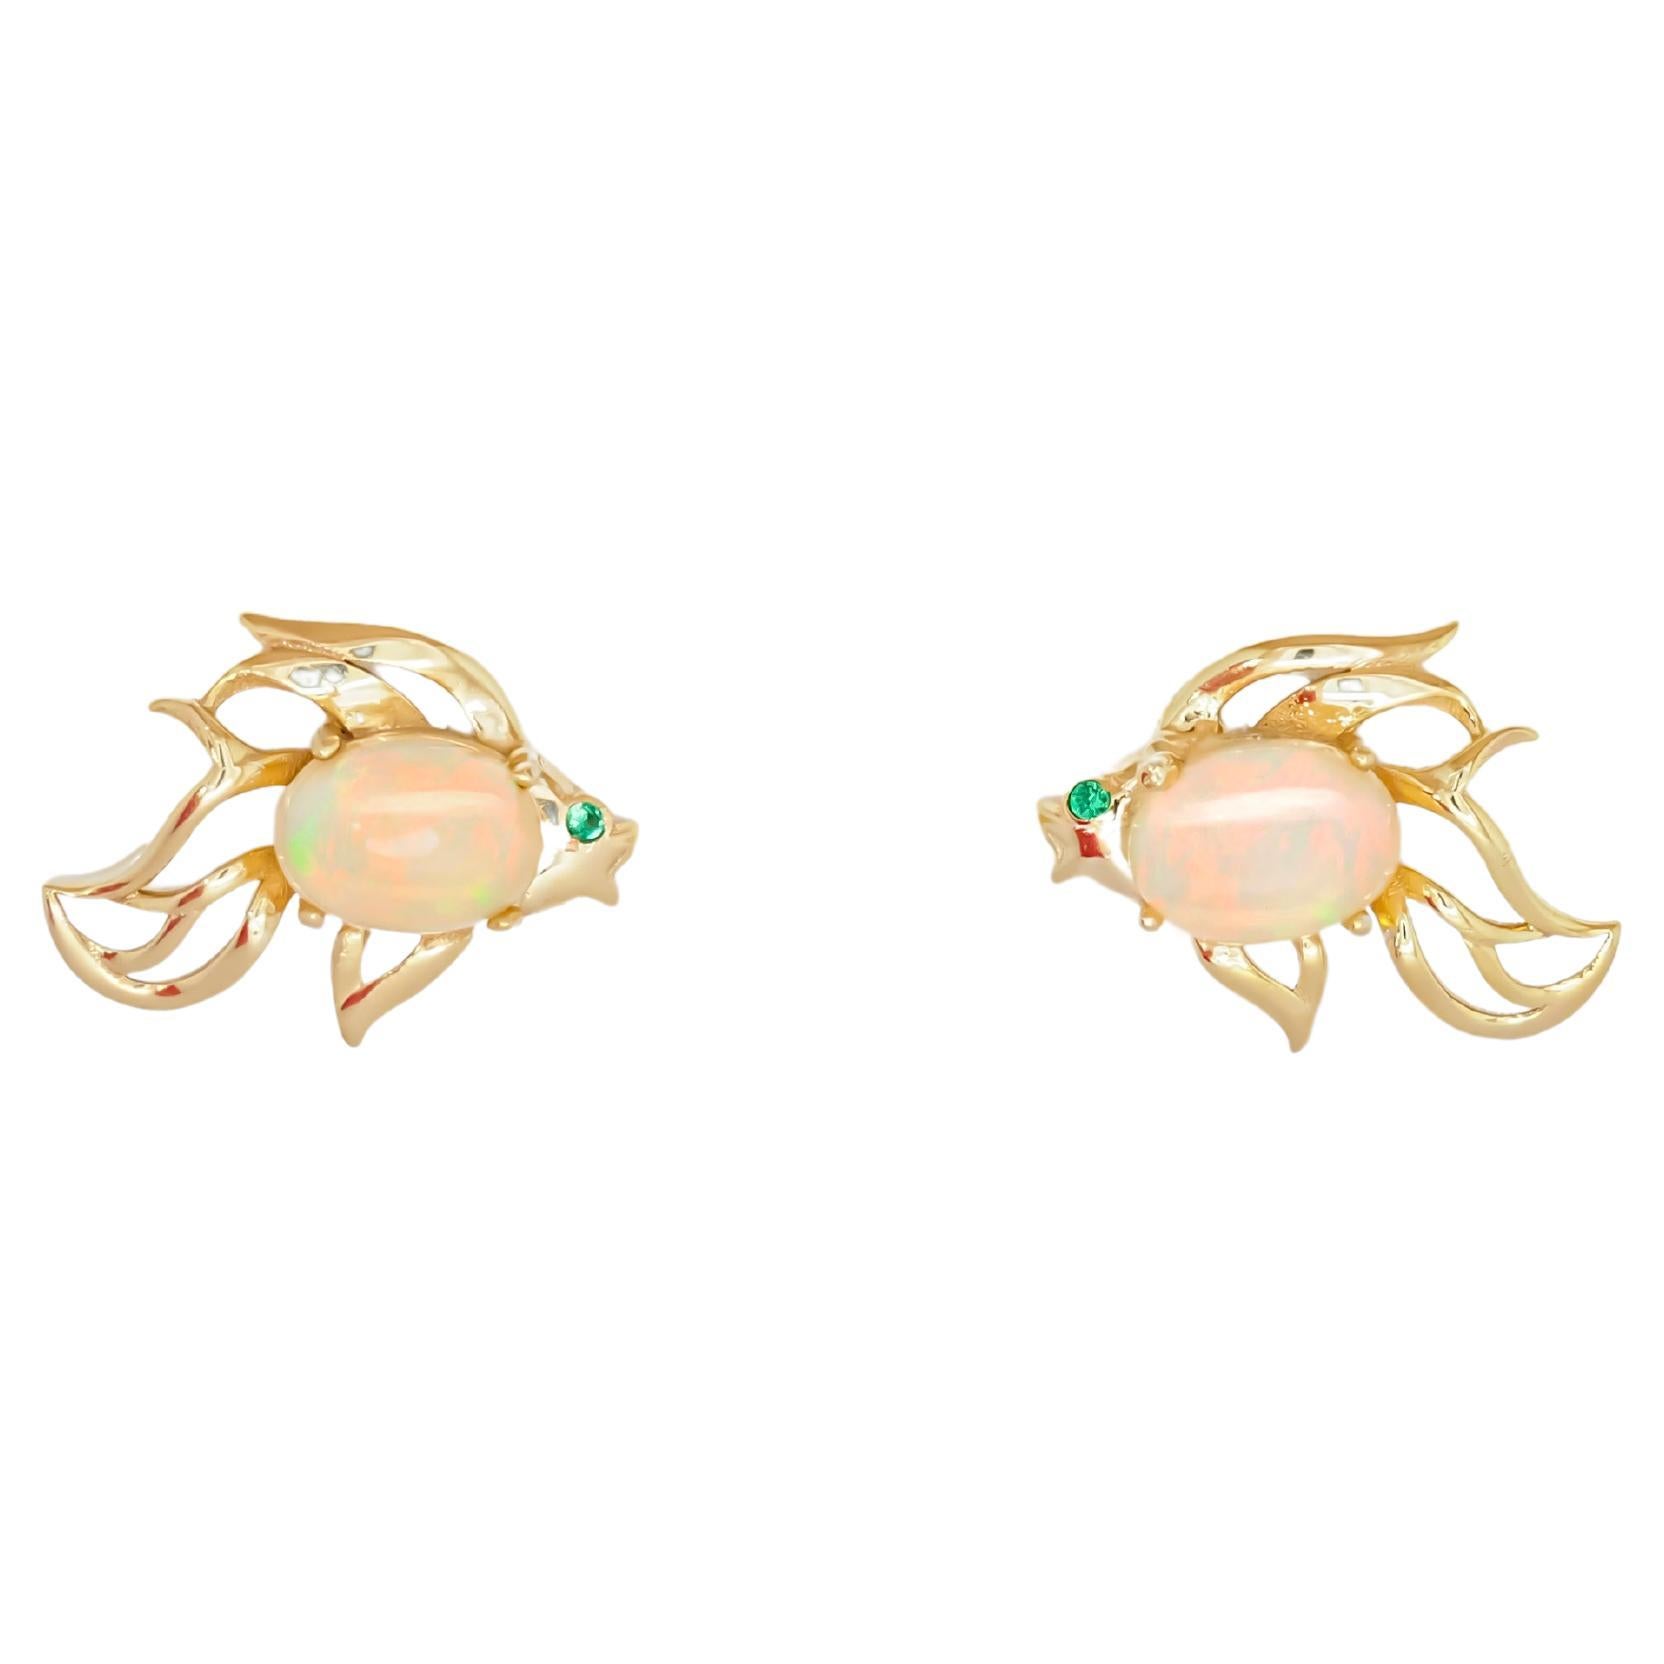 14k gold Fish earrings studs set in 14k gold.  For Sale